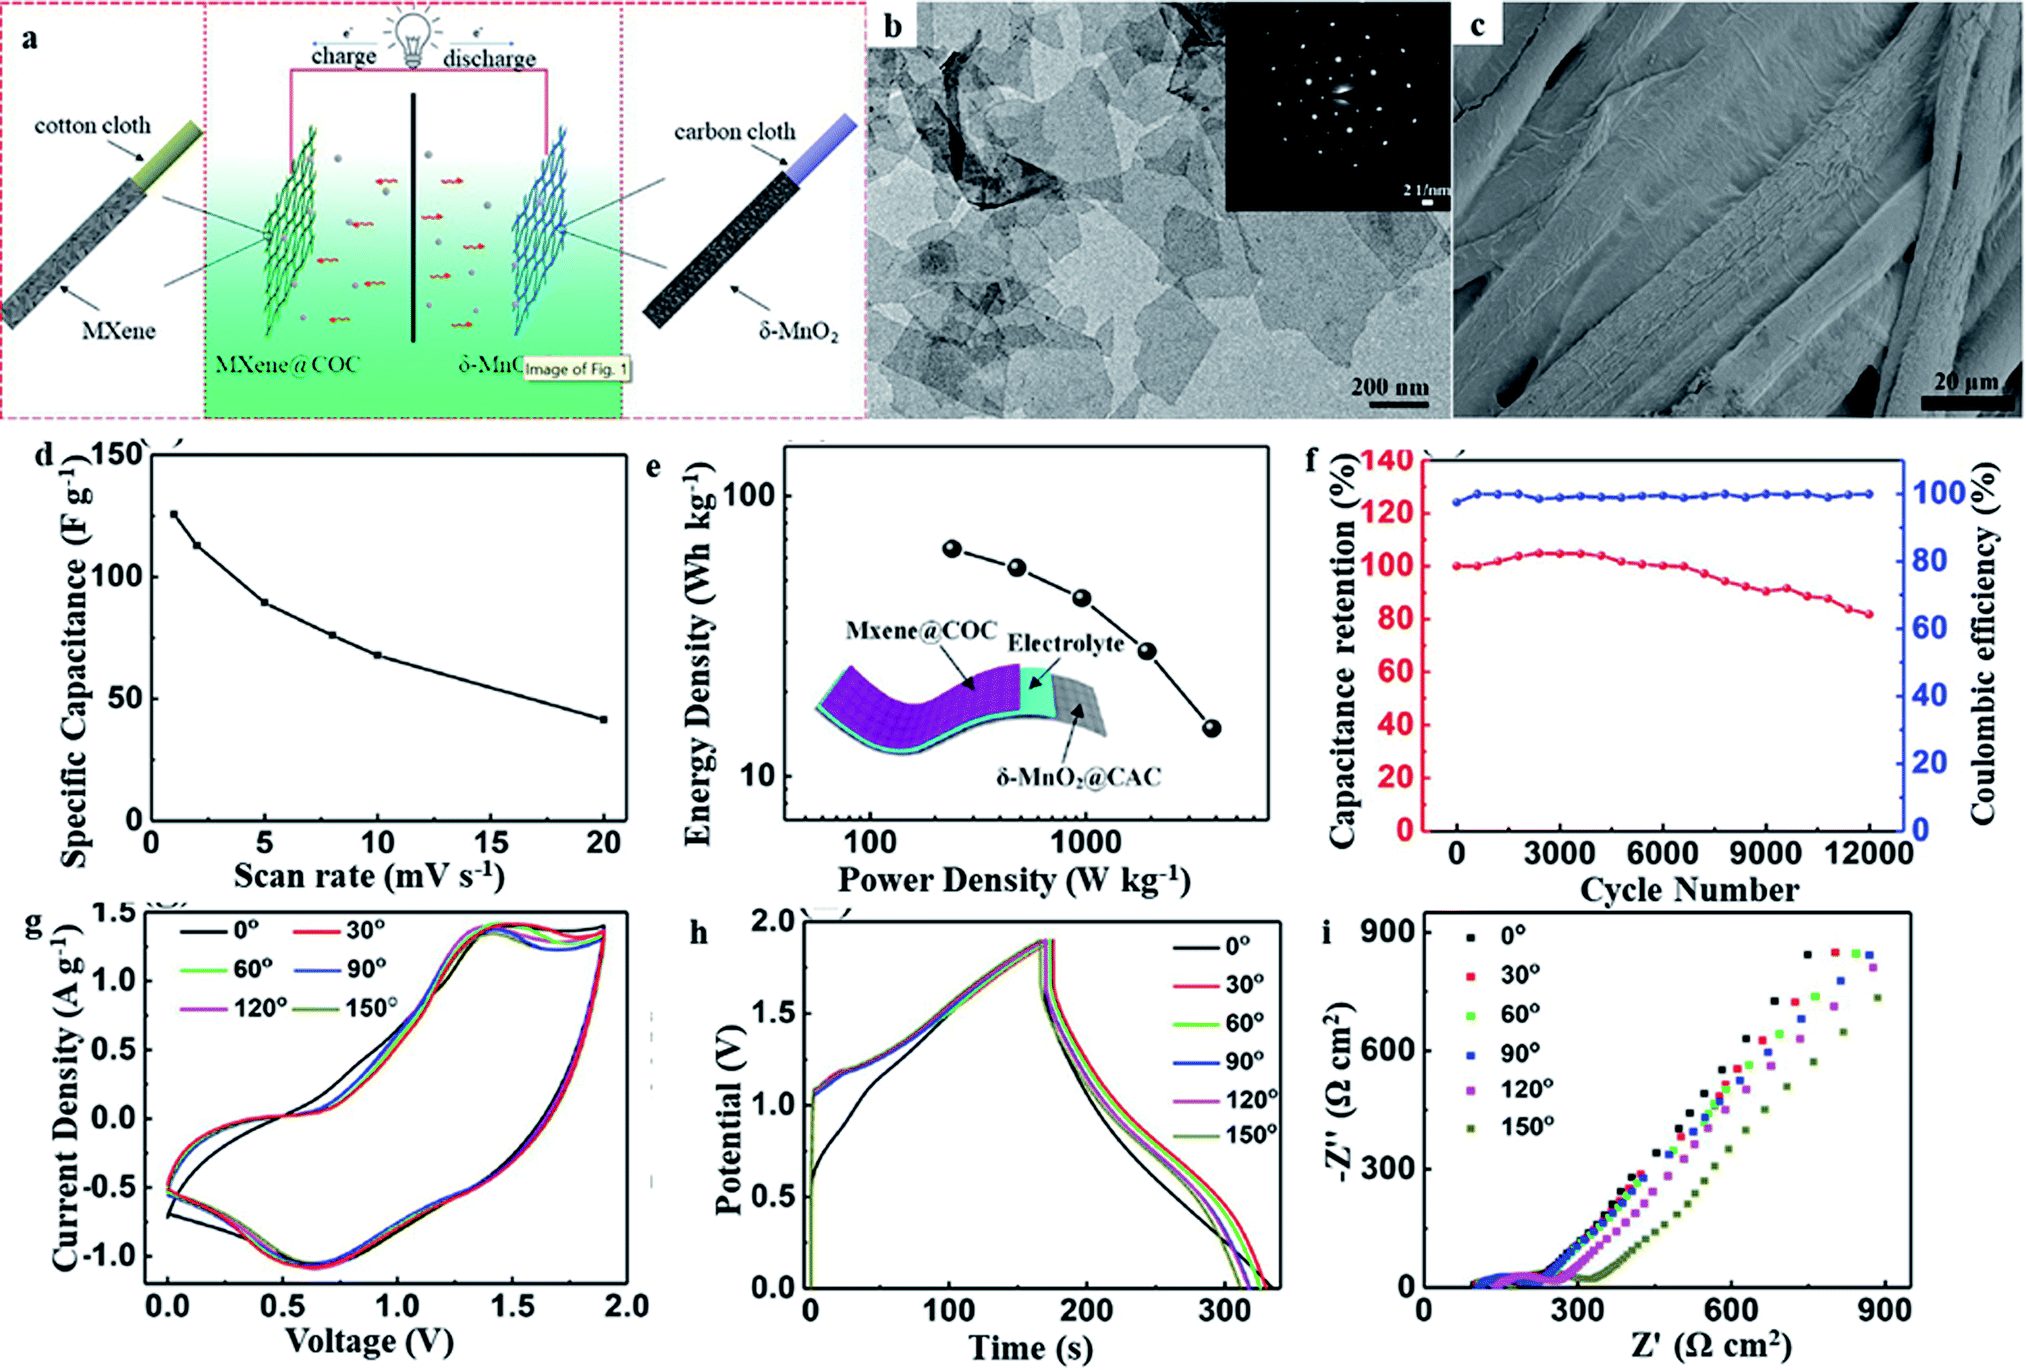 Application Of Mxene Based Materials In Hybrid Capacitors Sustainable Energy Fuels Rsc Publishing Doi 10 1039 D1sed